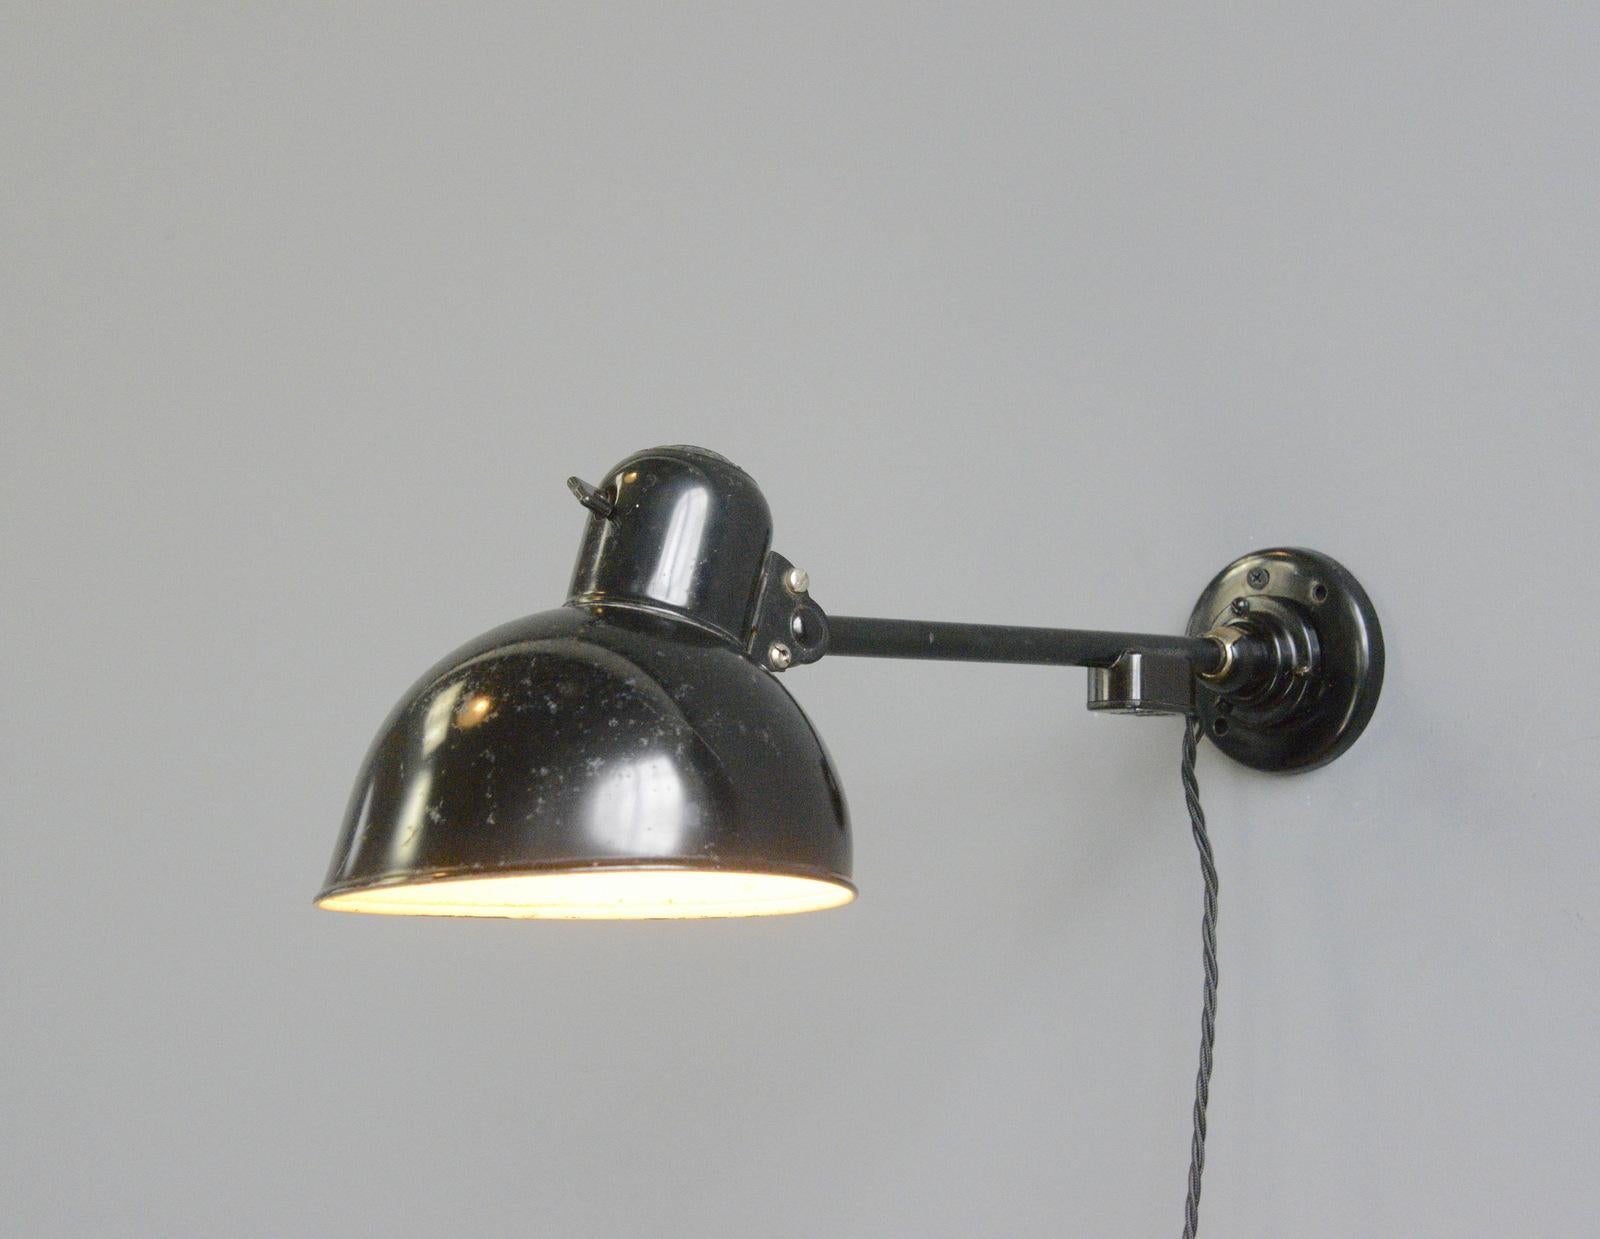 Kaiser Jdell Model 6723 wall lamp by Christian Dell

- Adjustable shade and arm
- Takes E27 fitting bulbs
- Original black paint
- Marked 